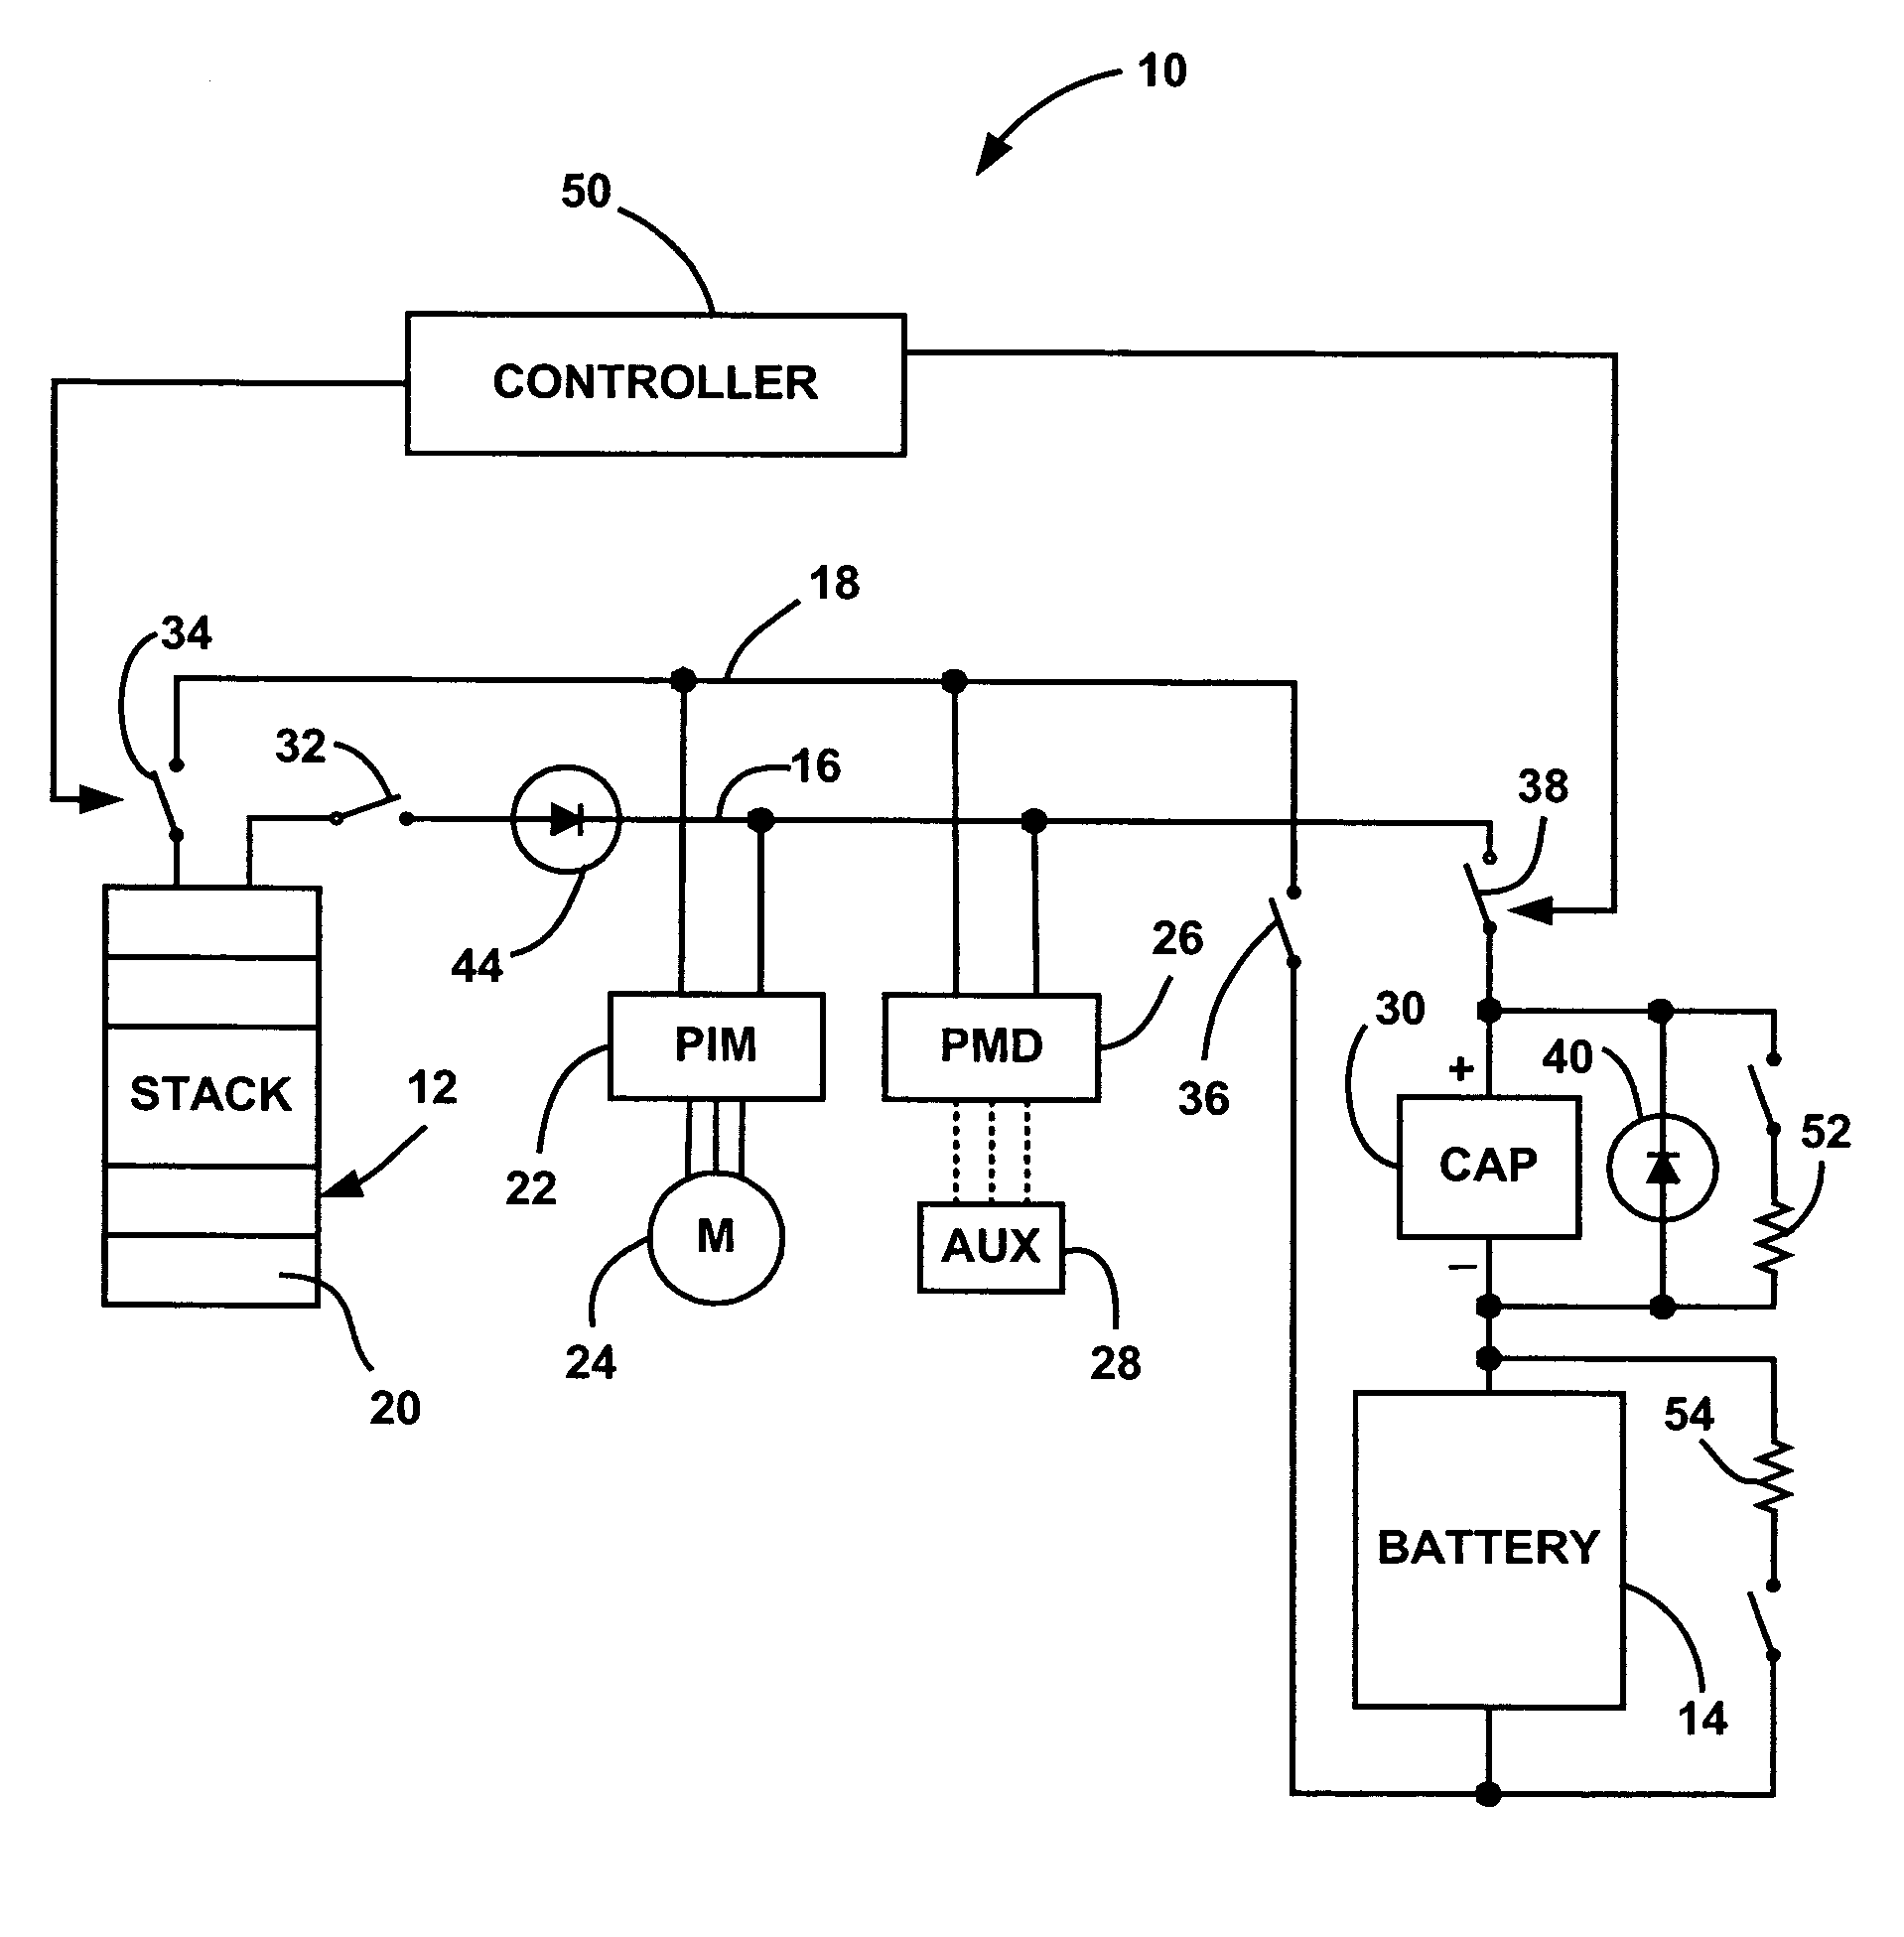 Hybrid fuel cell system with battery capacitor energy storage system